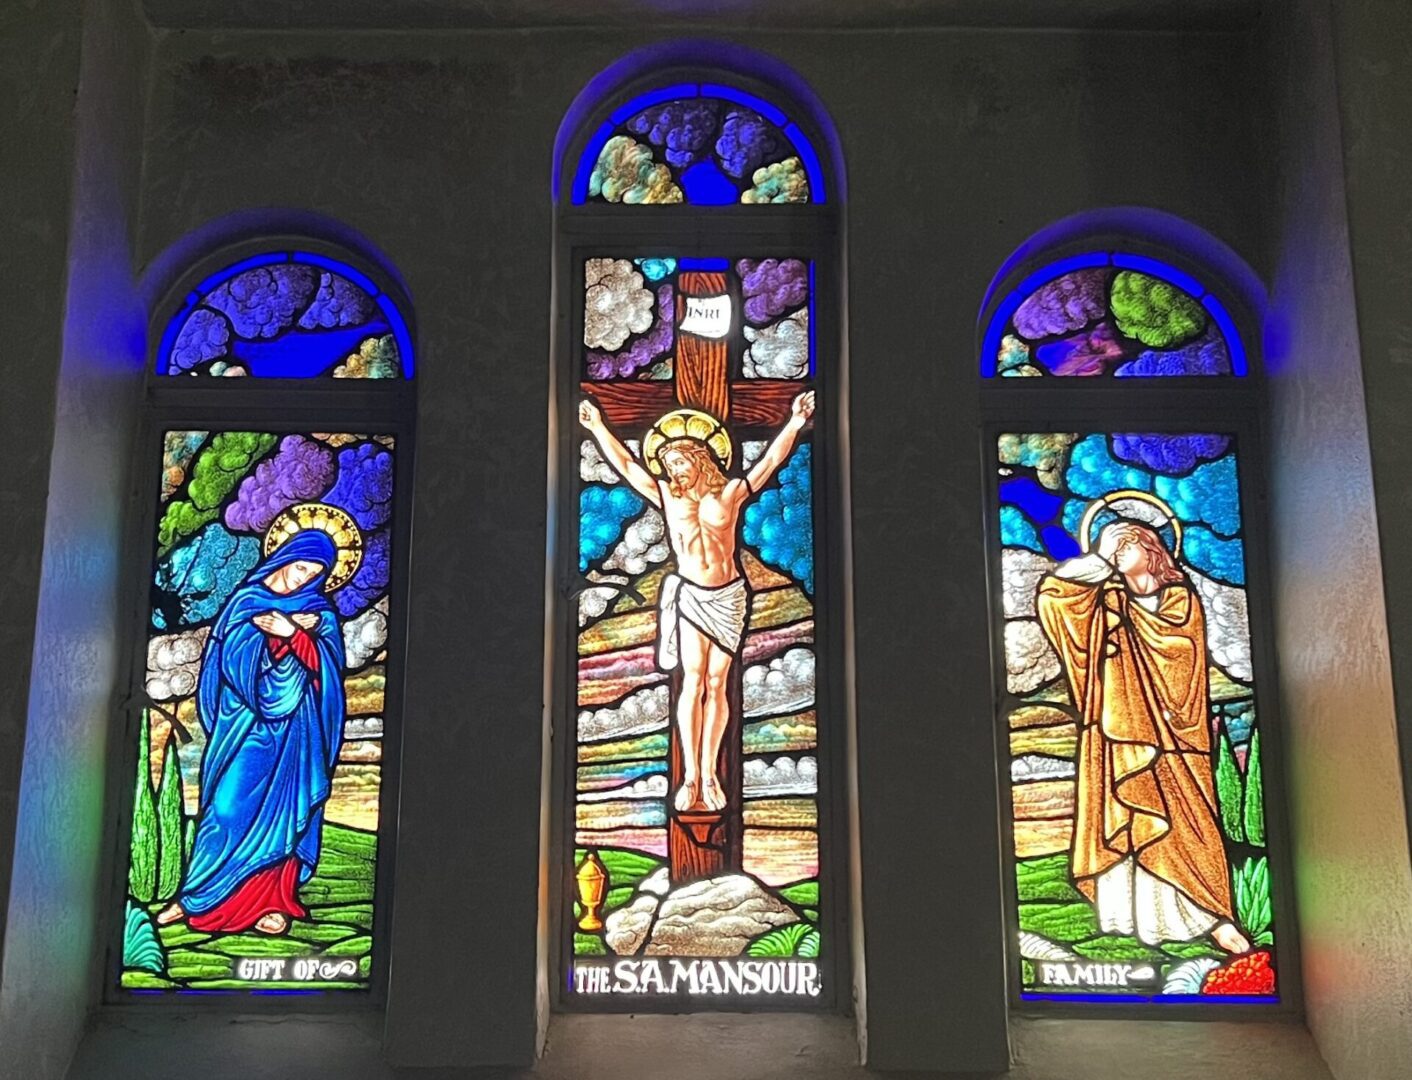 A stained glass window depicting jesus, mary and st. John